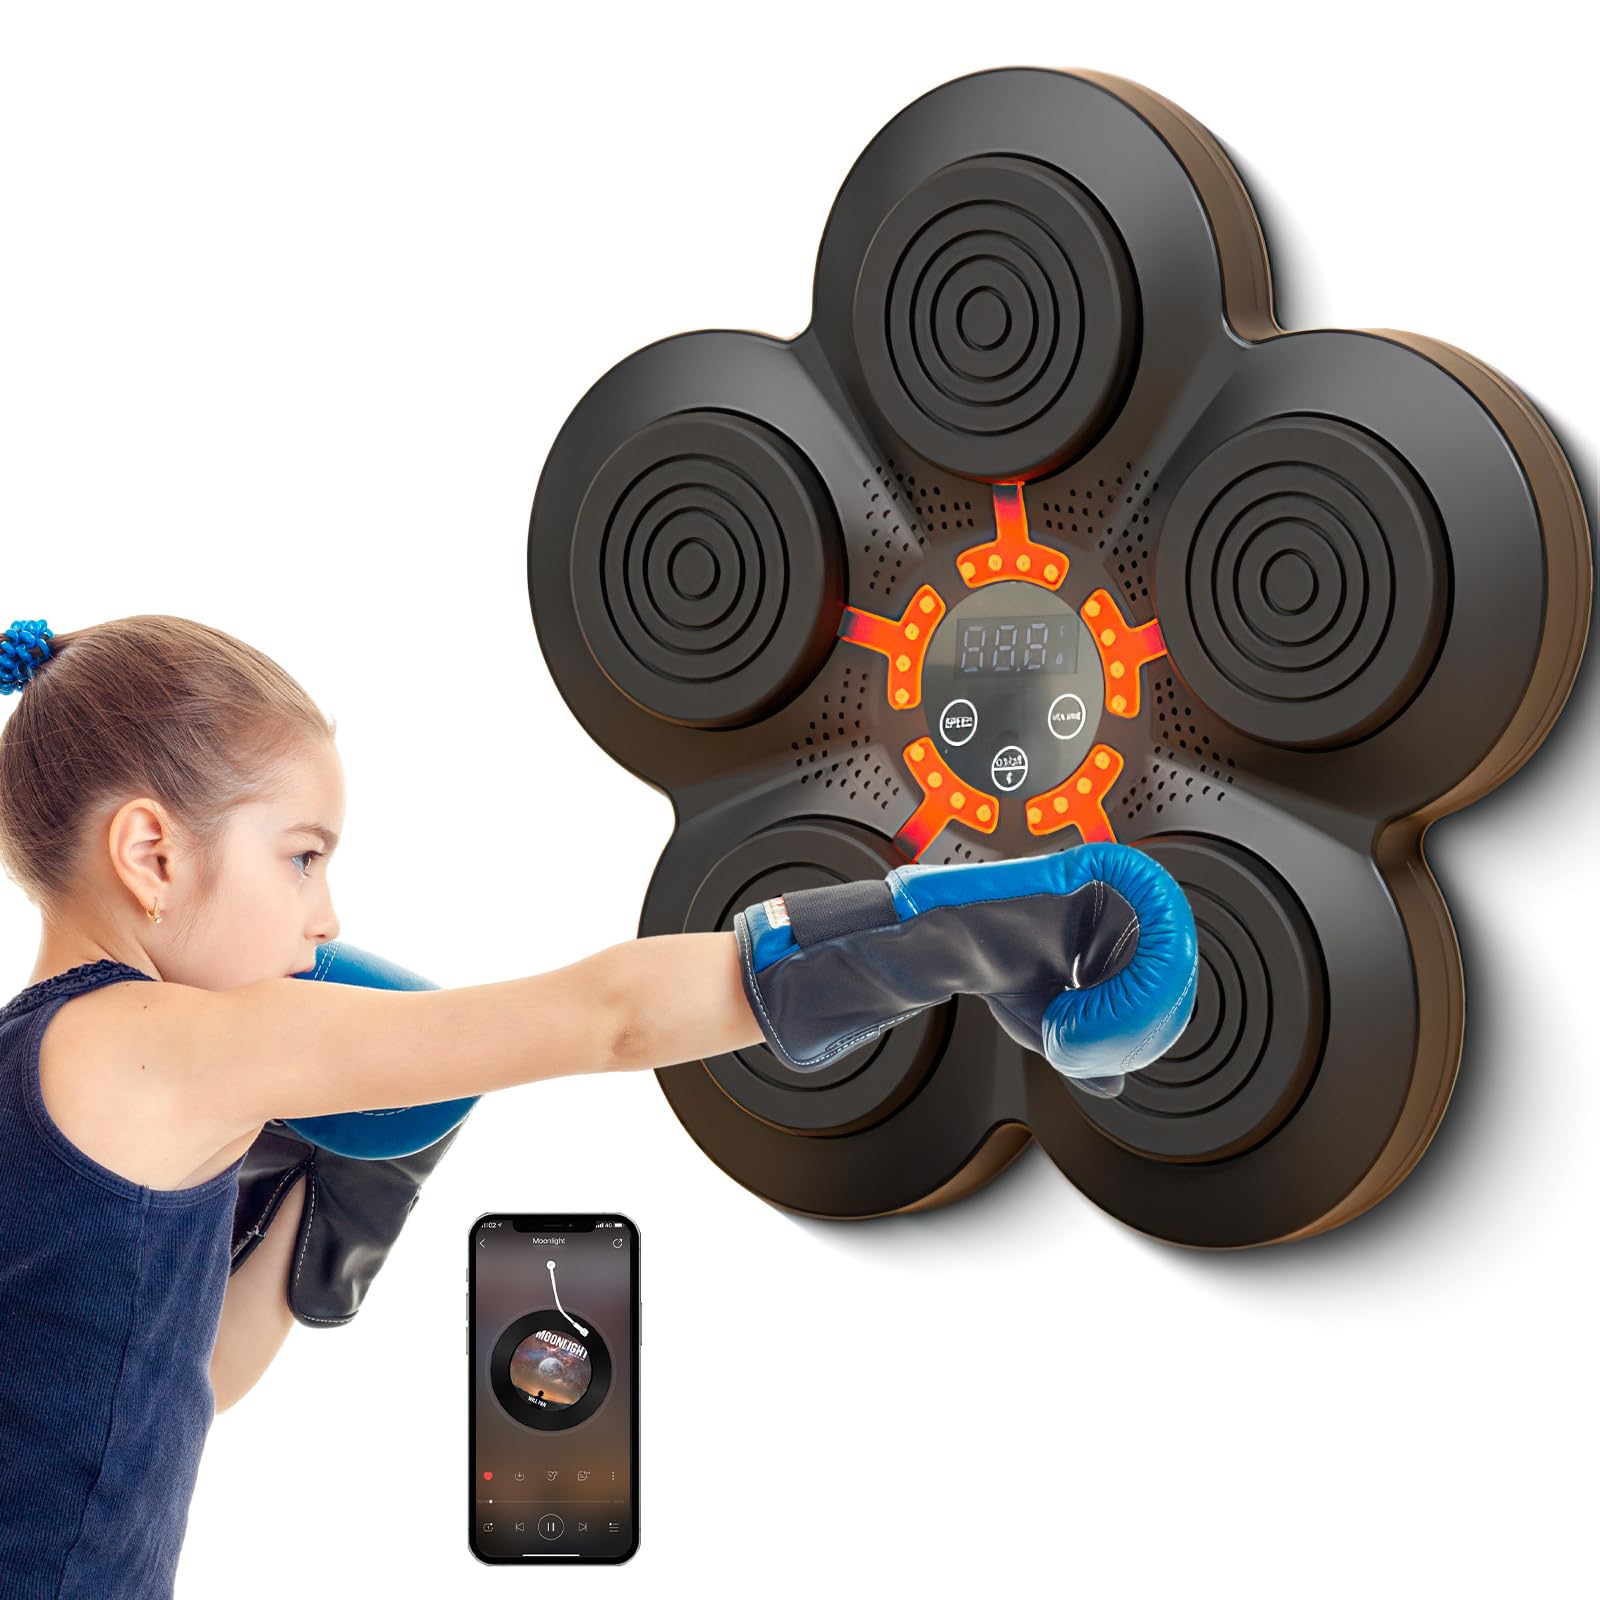 Fulluky Music Boxing Machine, Music Electronic Boxing, Wall Target Boxing Machine, with 6 Lights and Bluetooth Sensor, Boxing Training Devices with Boxing Gloves（ohne Handschuhe）